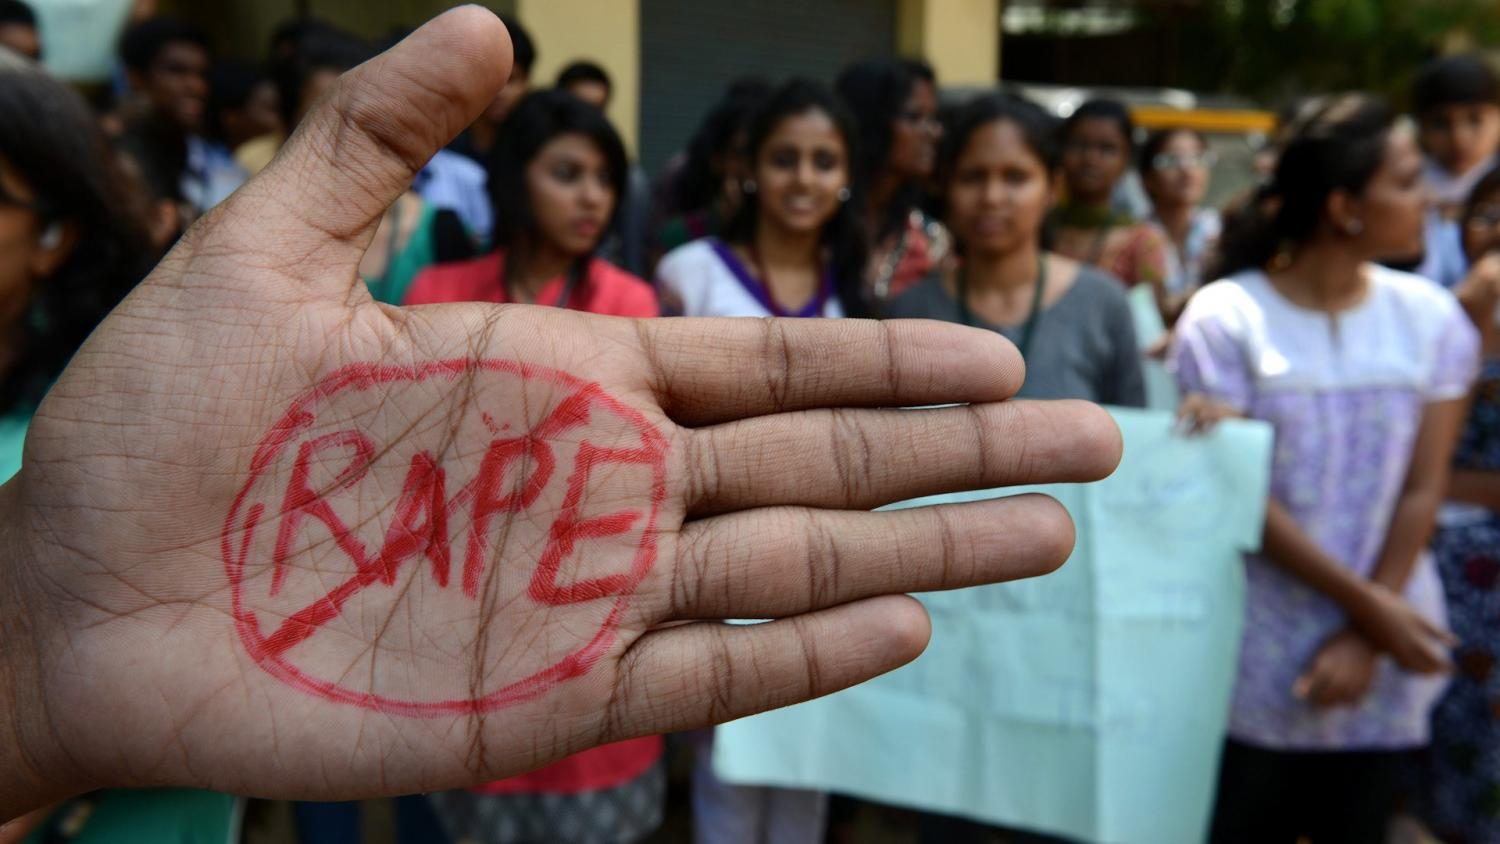 Indian students of Saint Joseph Degree college participate during an anti-rape protest in Hyderabad on September 13, 2013.